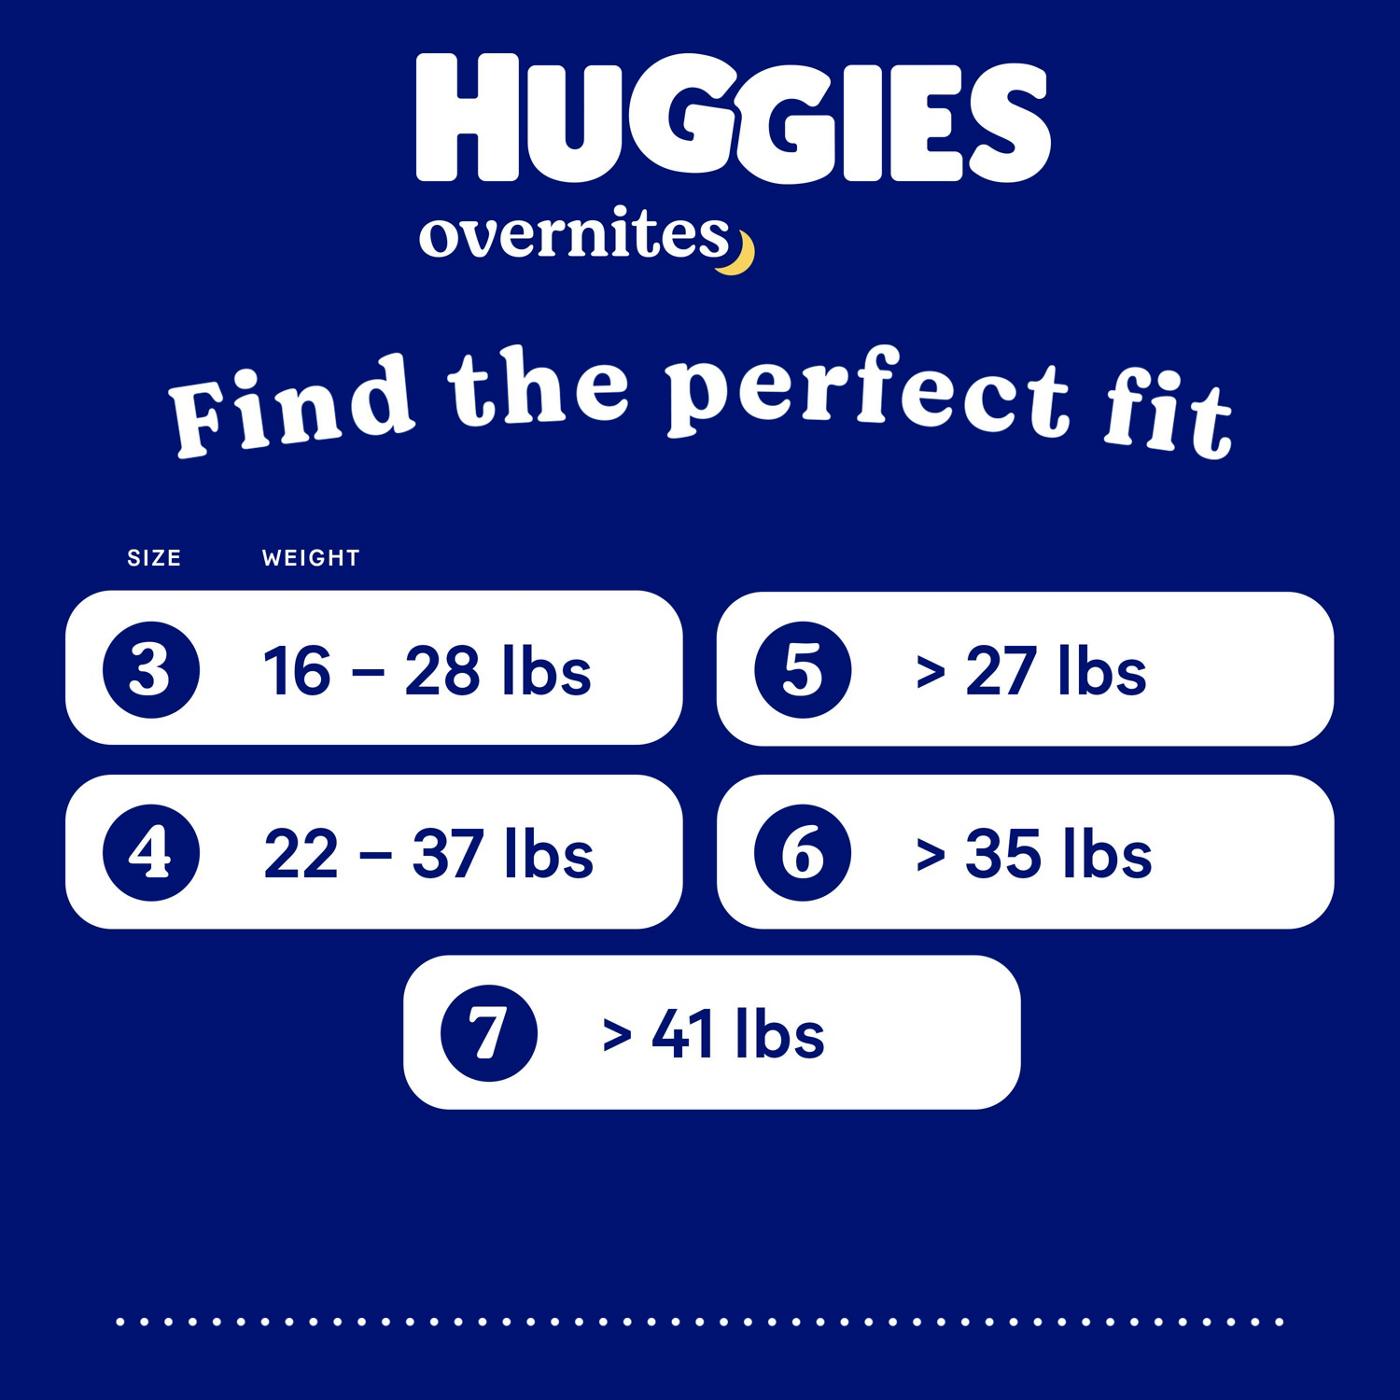 Huggies Overnites Nighttime Baby Diapers - Size 6; image 3 of 7